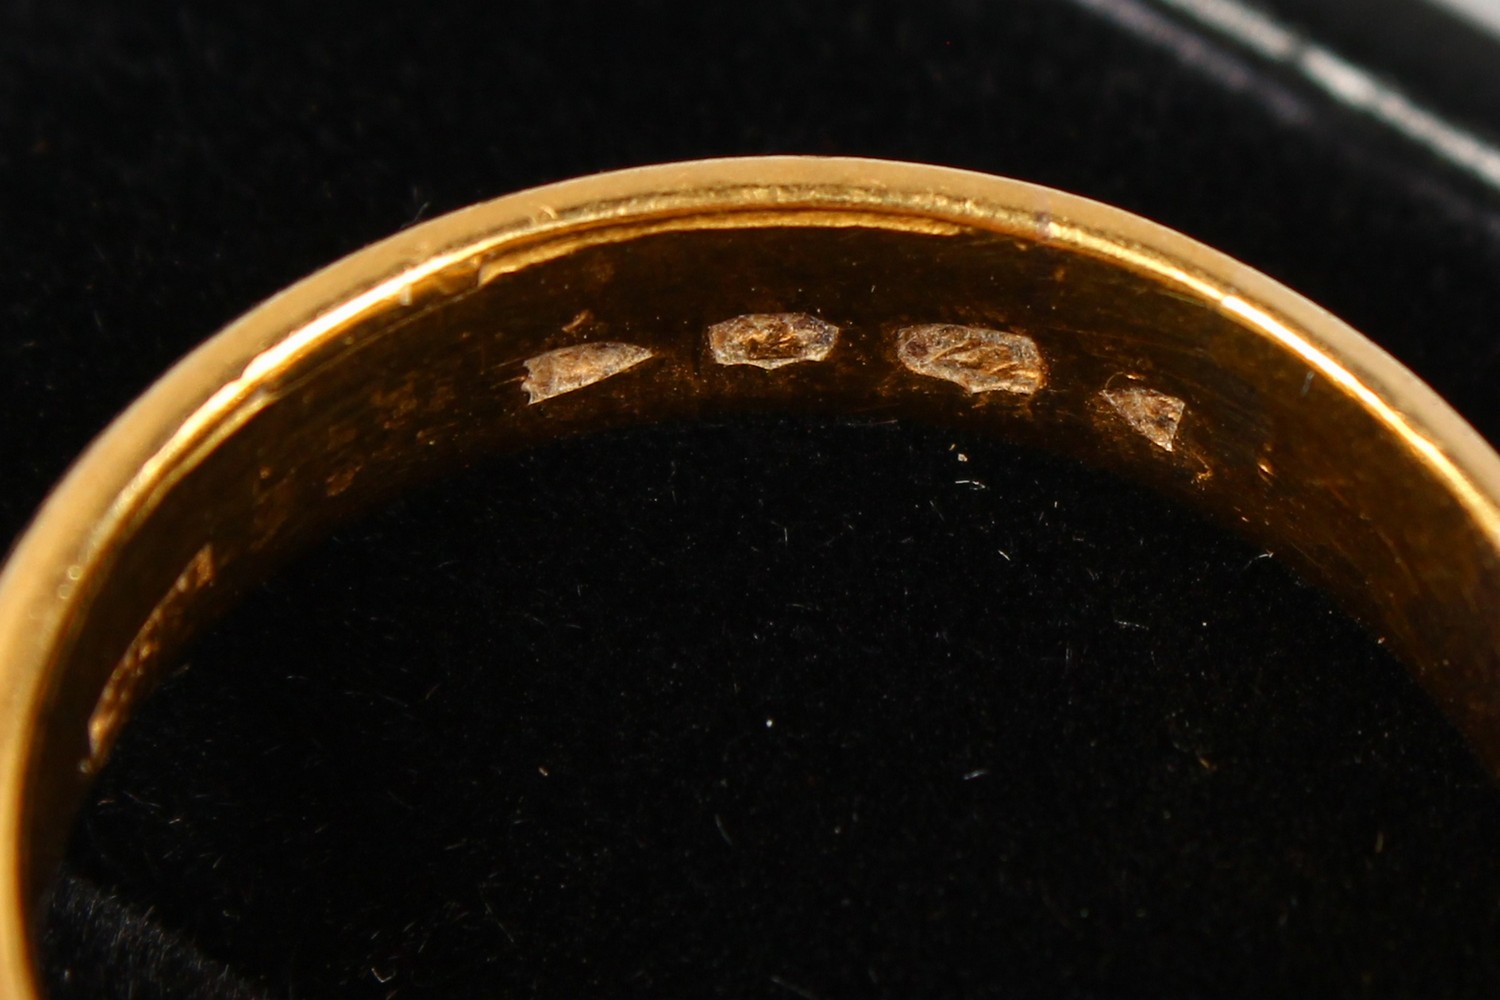 A 22CT GOLD WEDDING BAND, another gold ring with an inscription (2). - Image 10 of 11